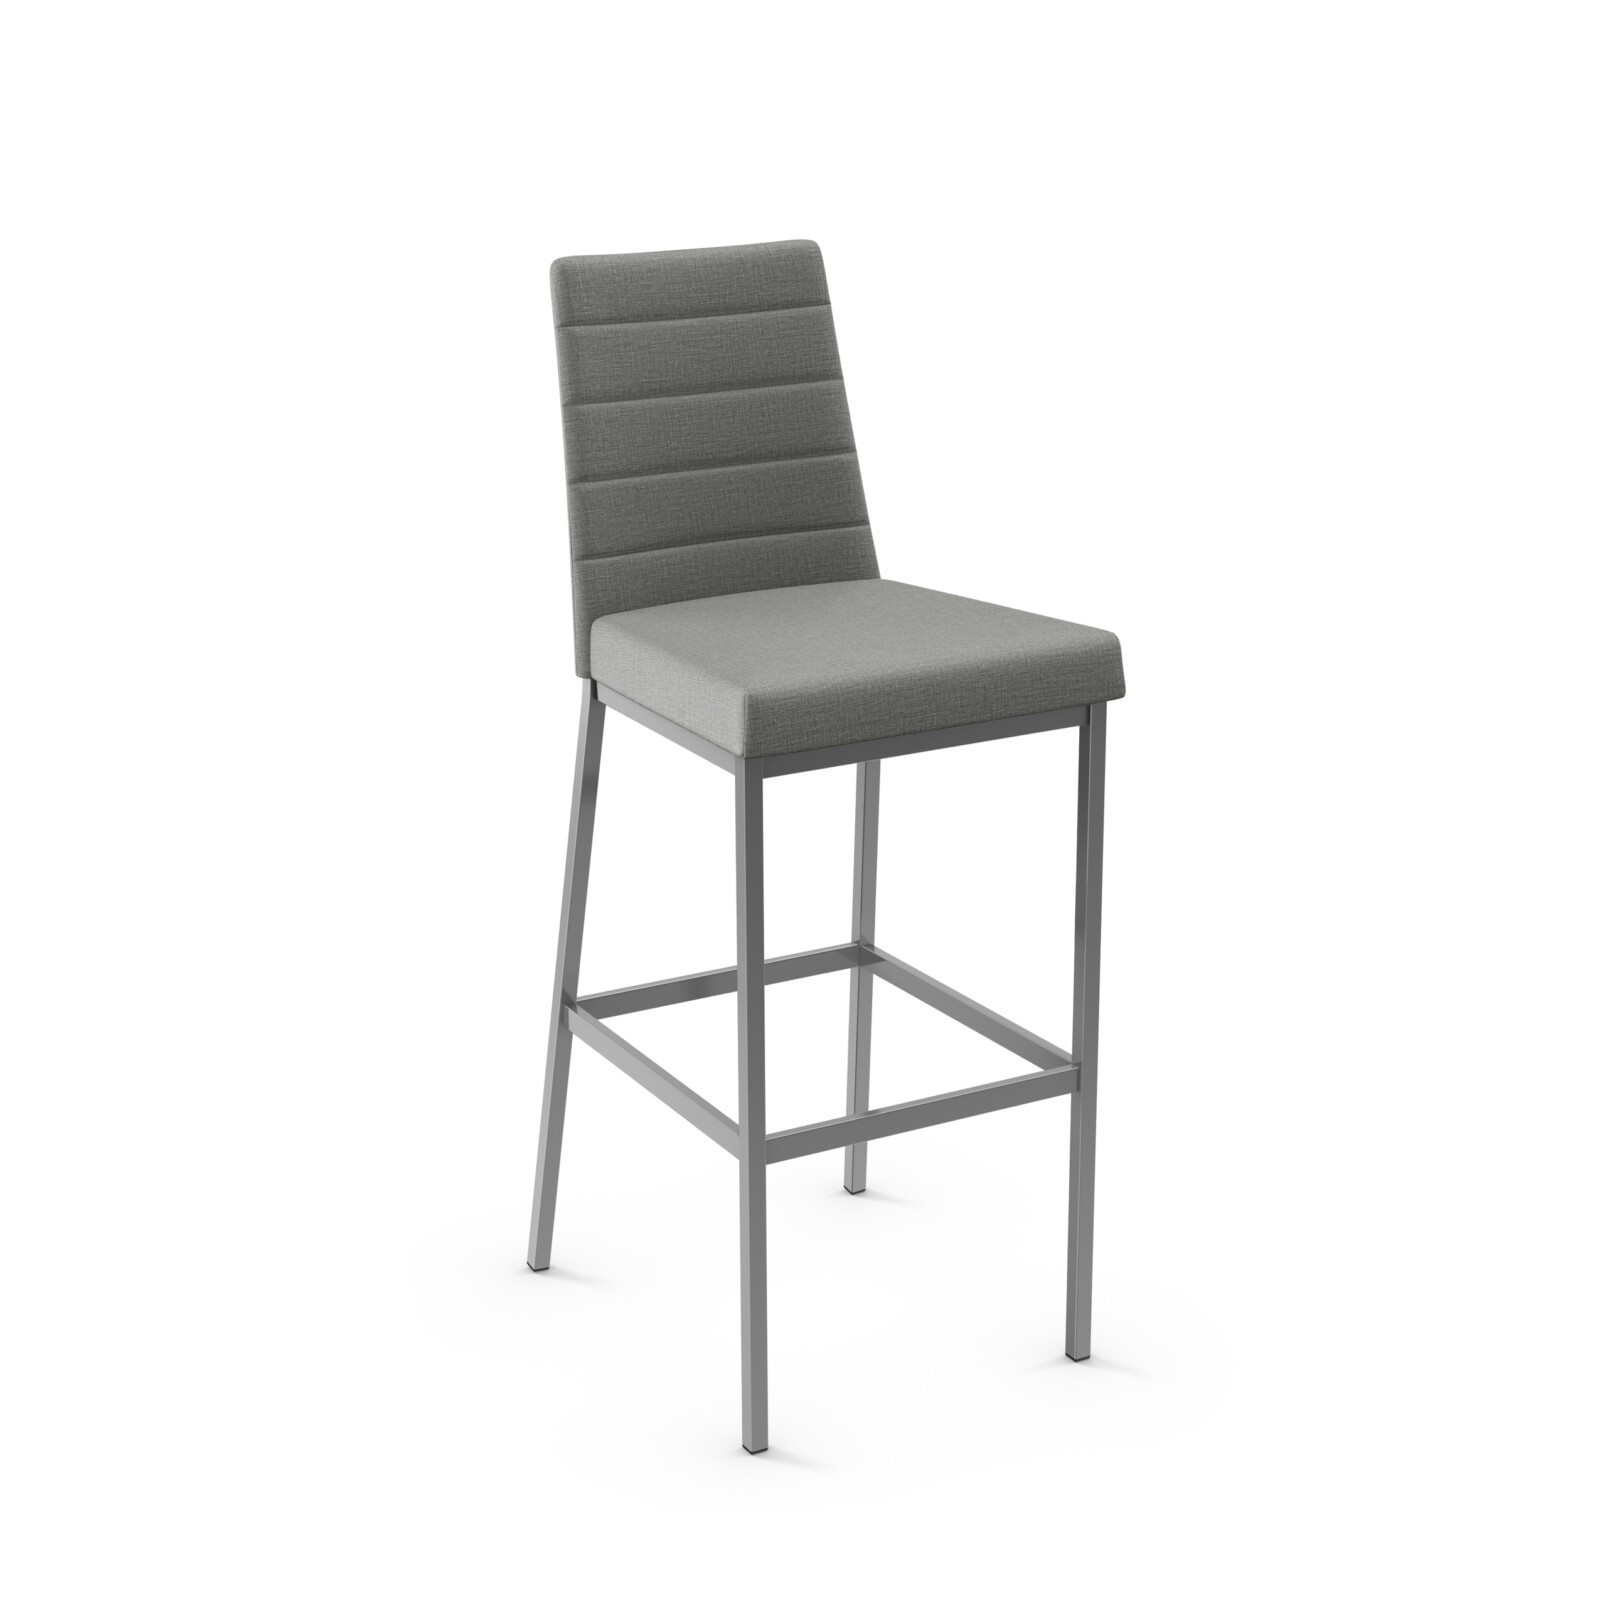 Metal Finish: 24 Magnetite • Seat and Back Covering: BI Ritzy, fabric (discontinued)